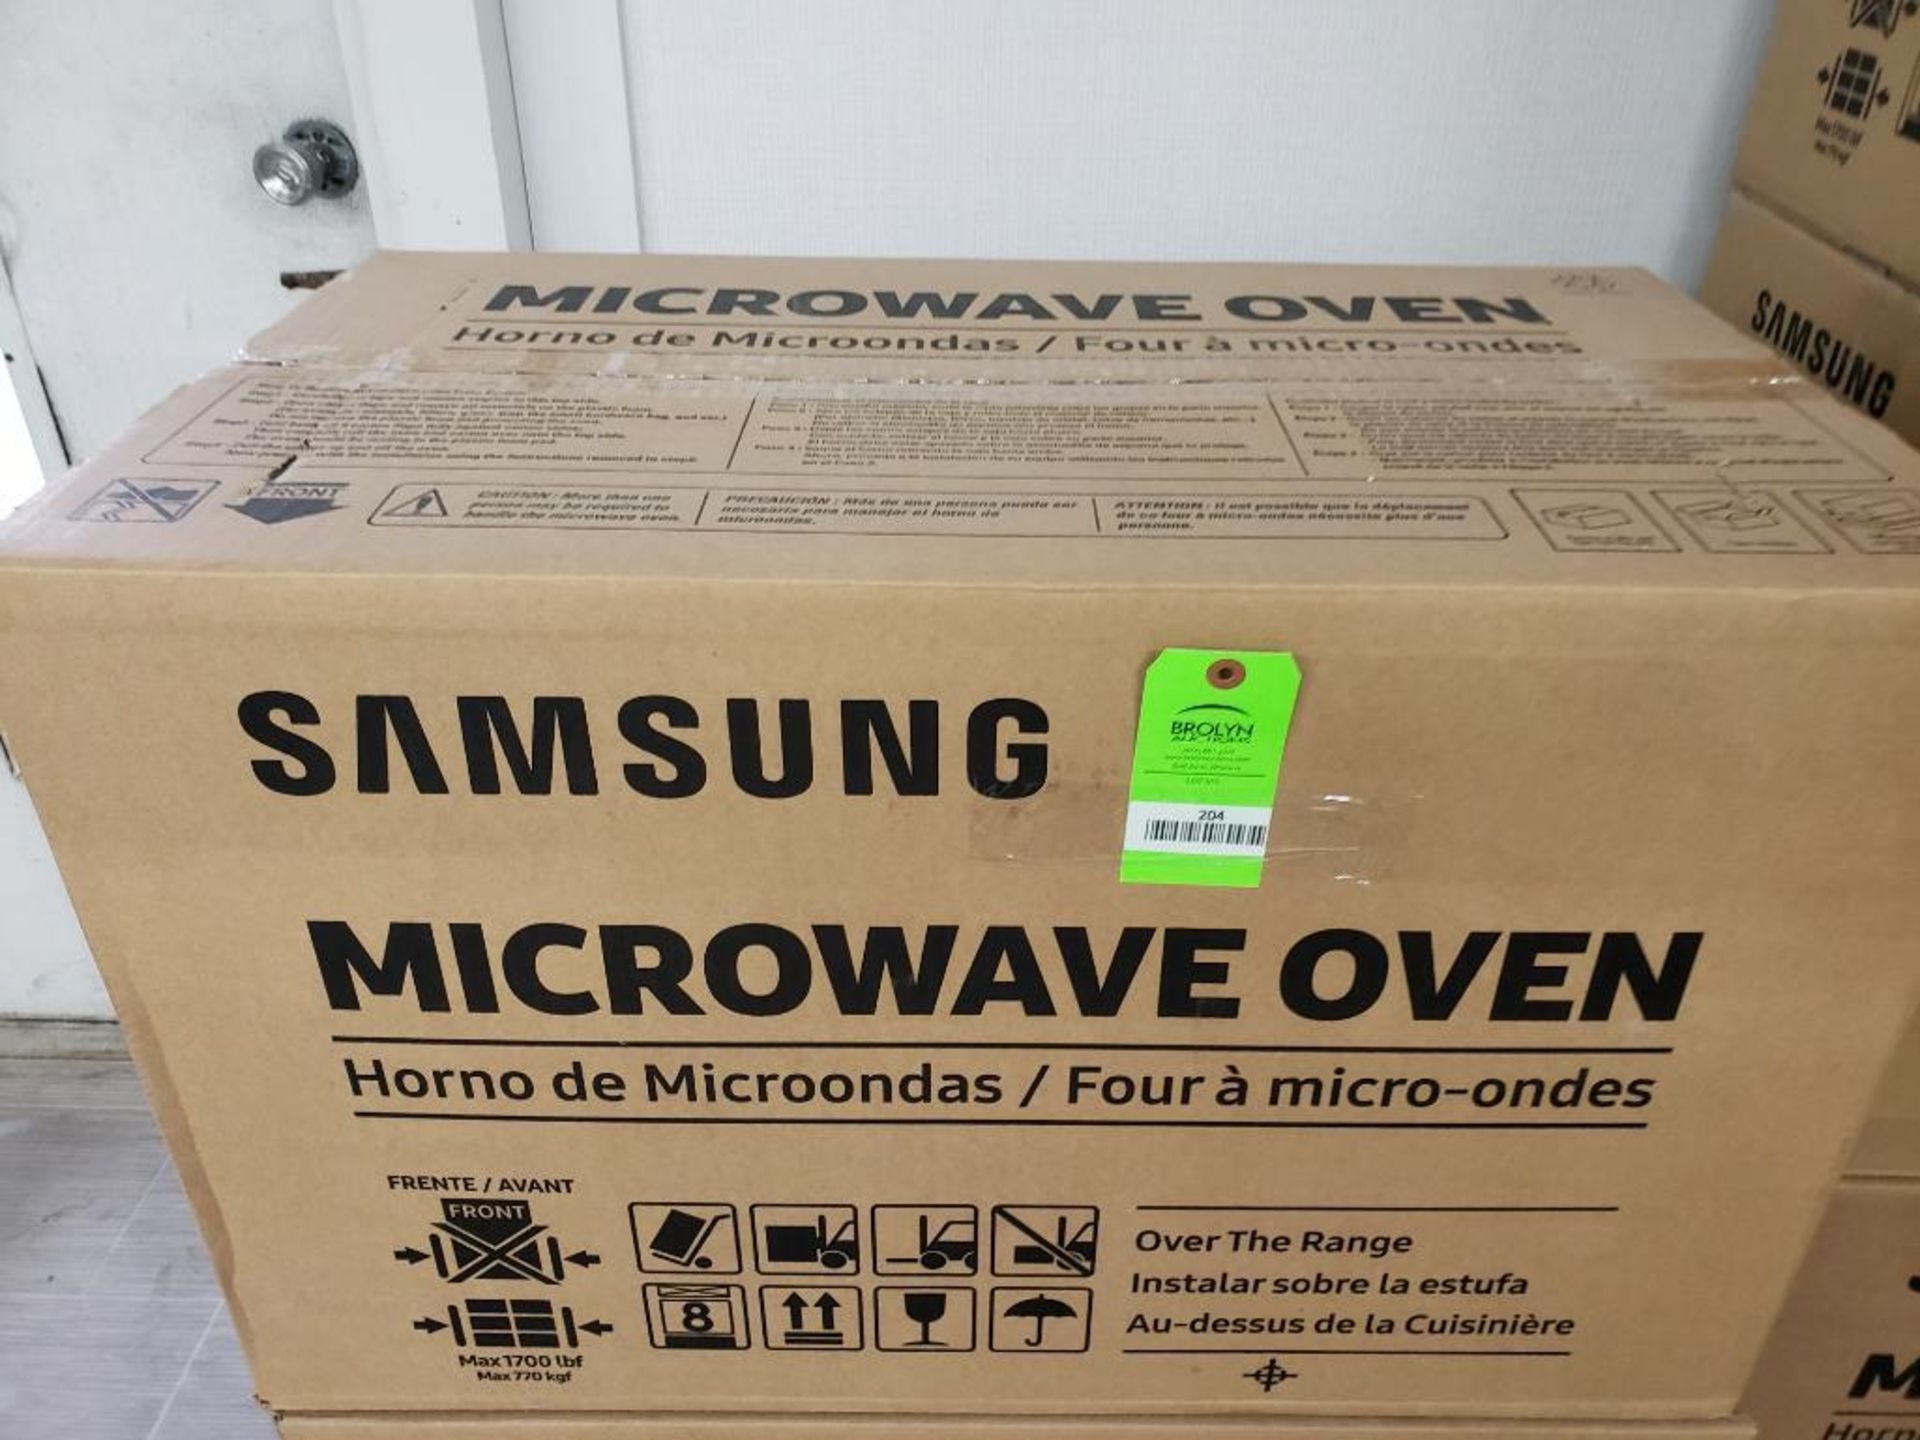 Samsung over the range microwave oven. Model number ME17R7021ES. New in box.